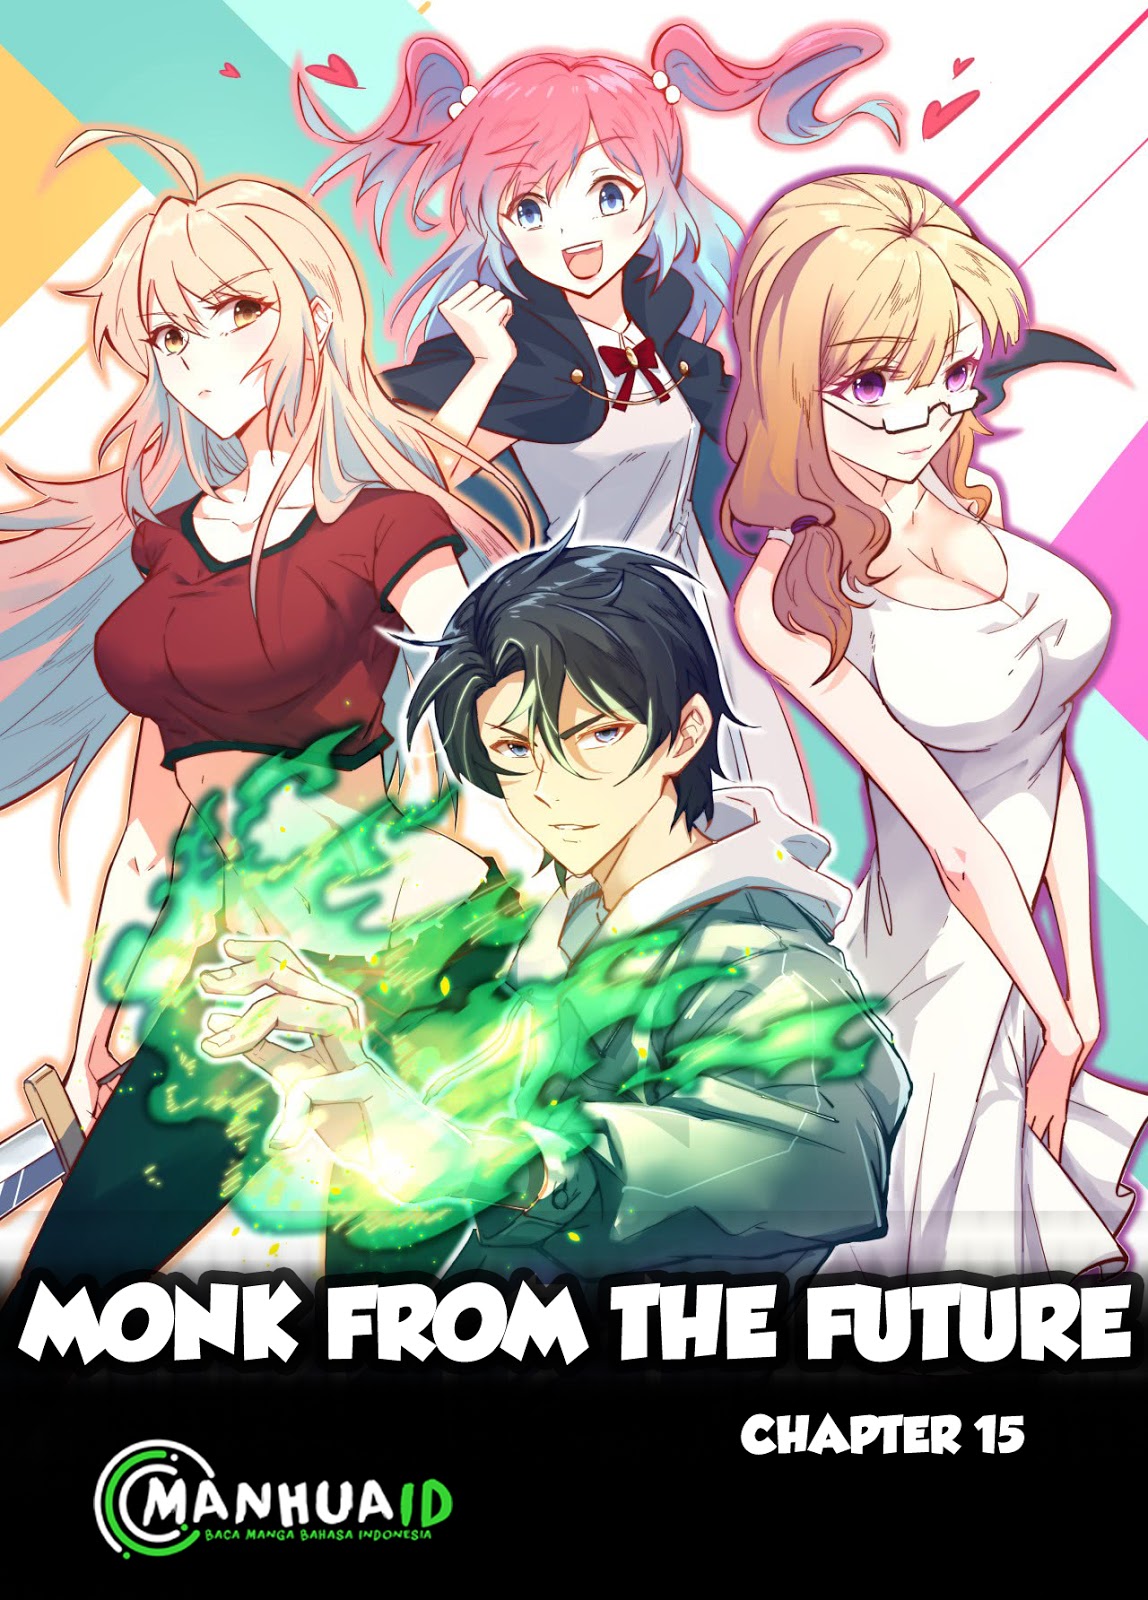 Monk From the Future Chapter 15